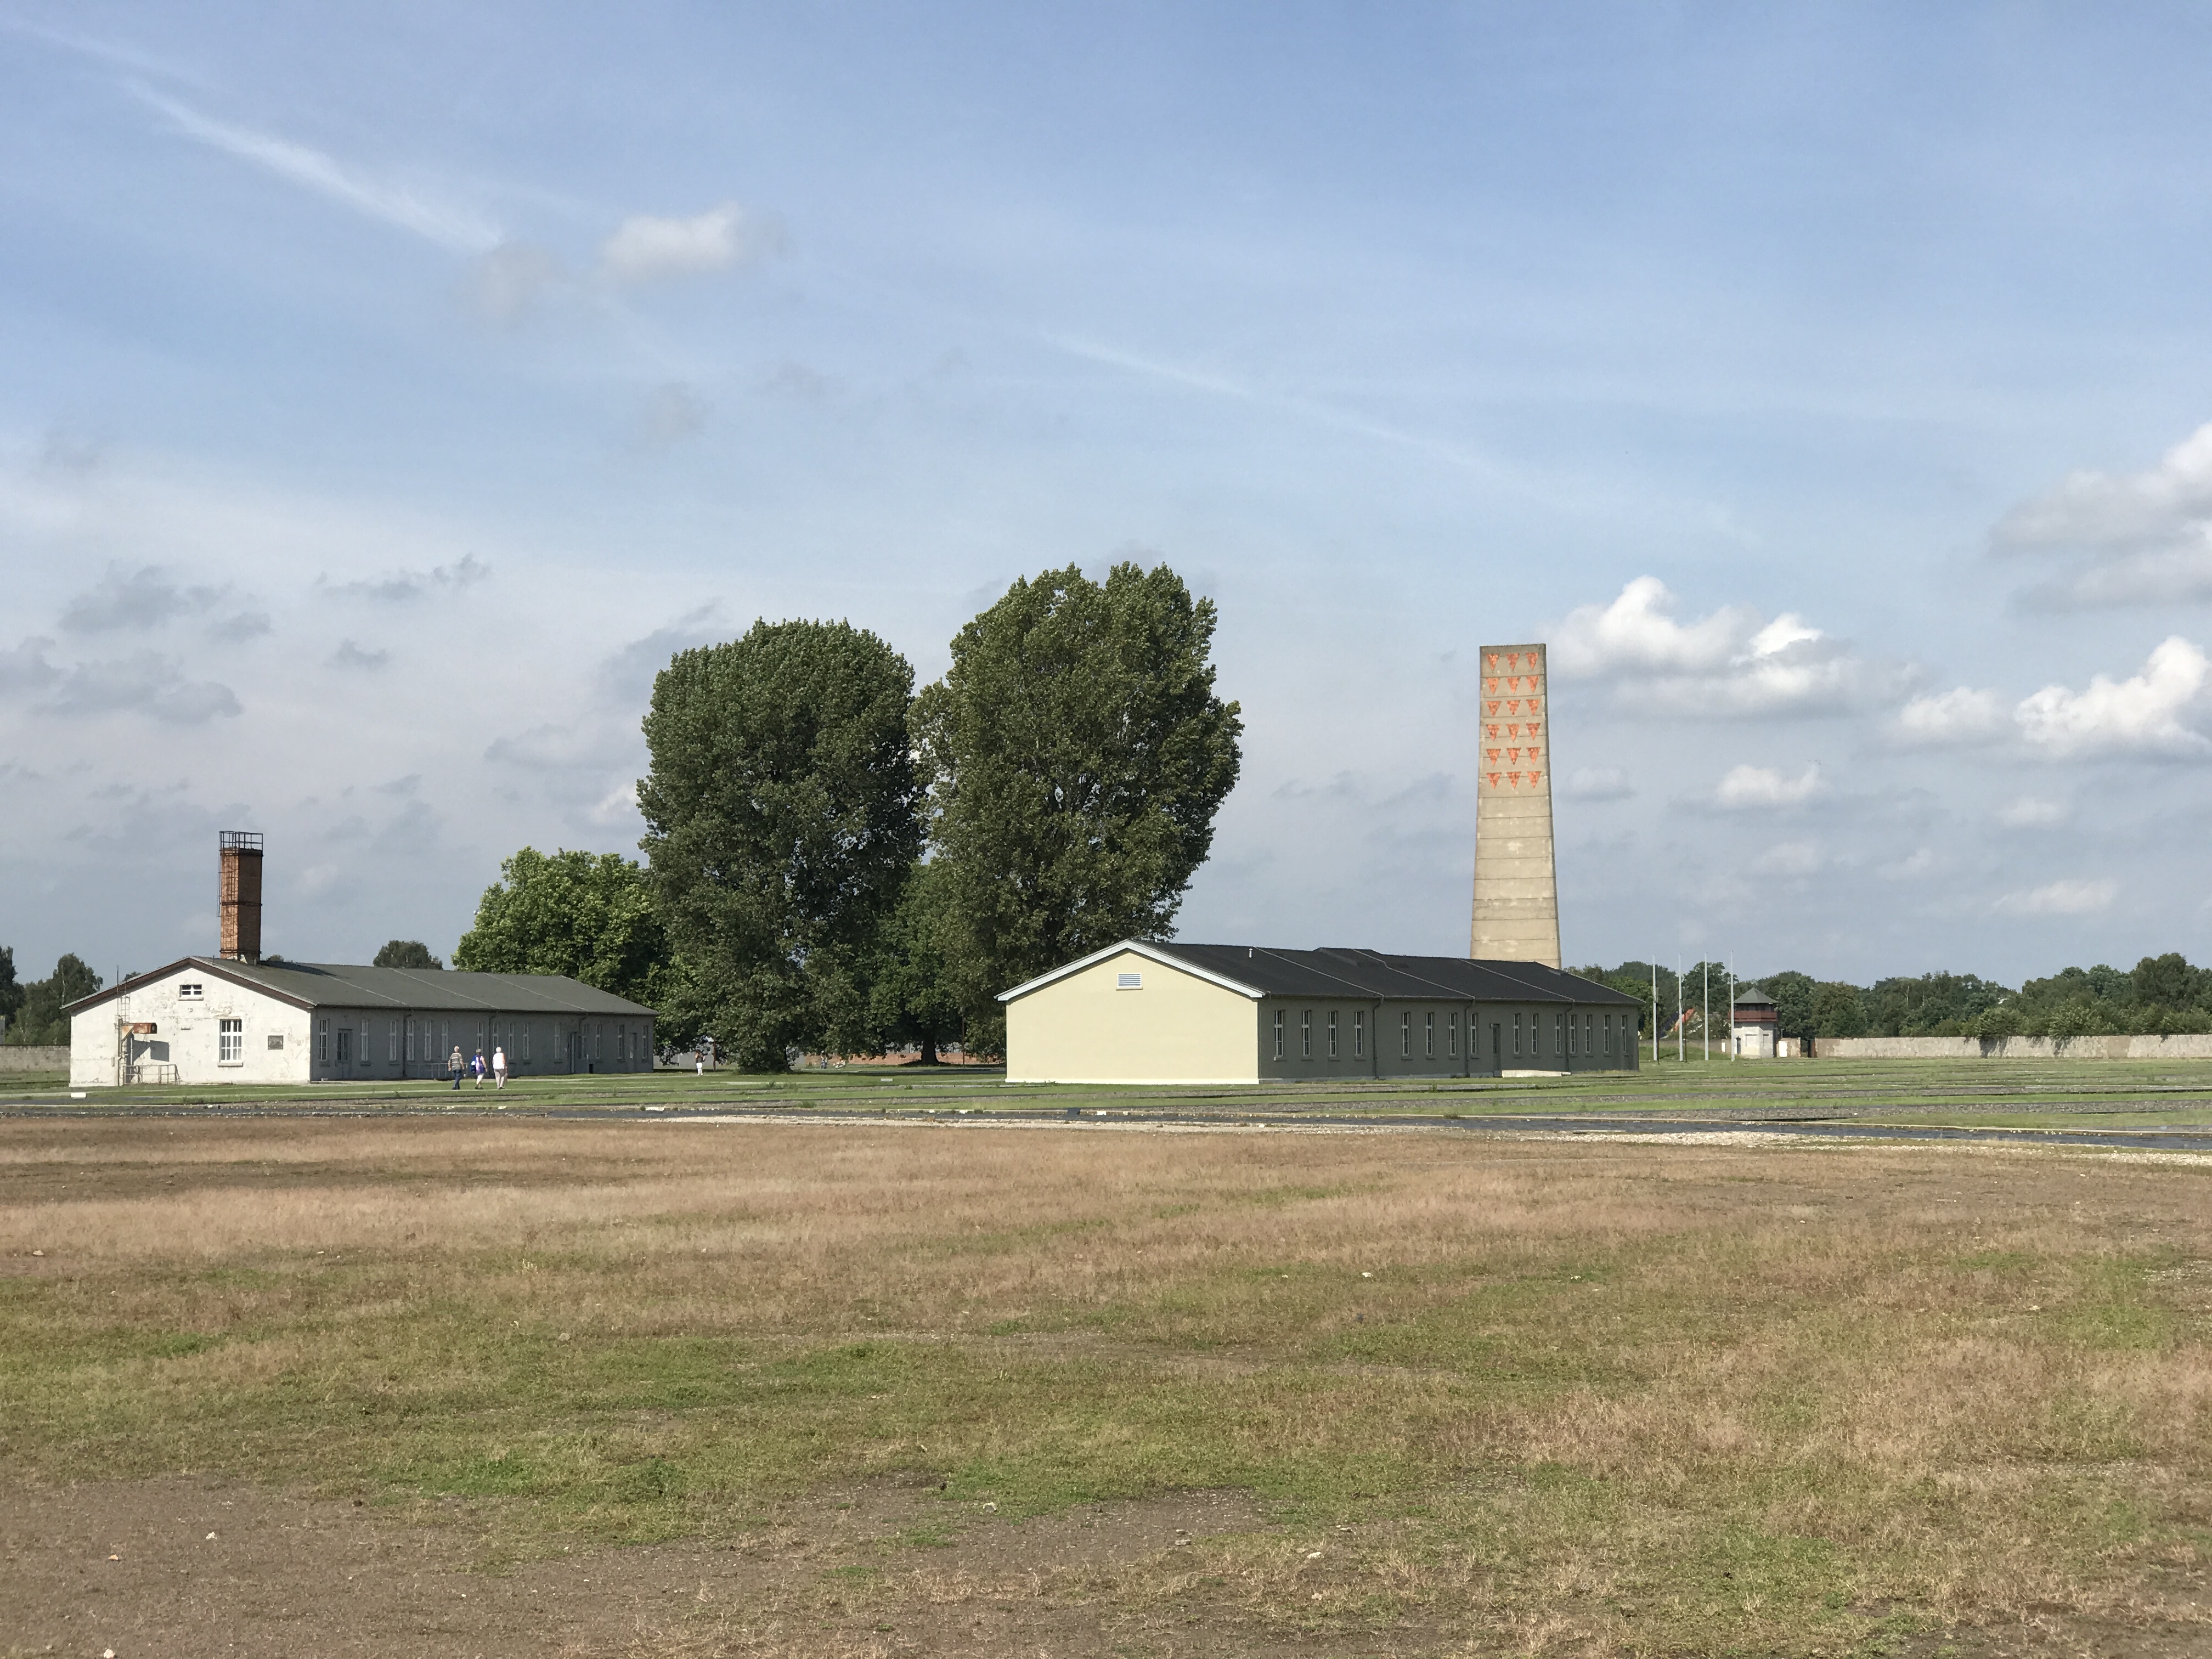 Some of what’s remaining still at Sachsenhausen. The tower memorial in the back was actually built by the Soviets when they took over the concentration camp after liberating it from the nazis.